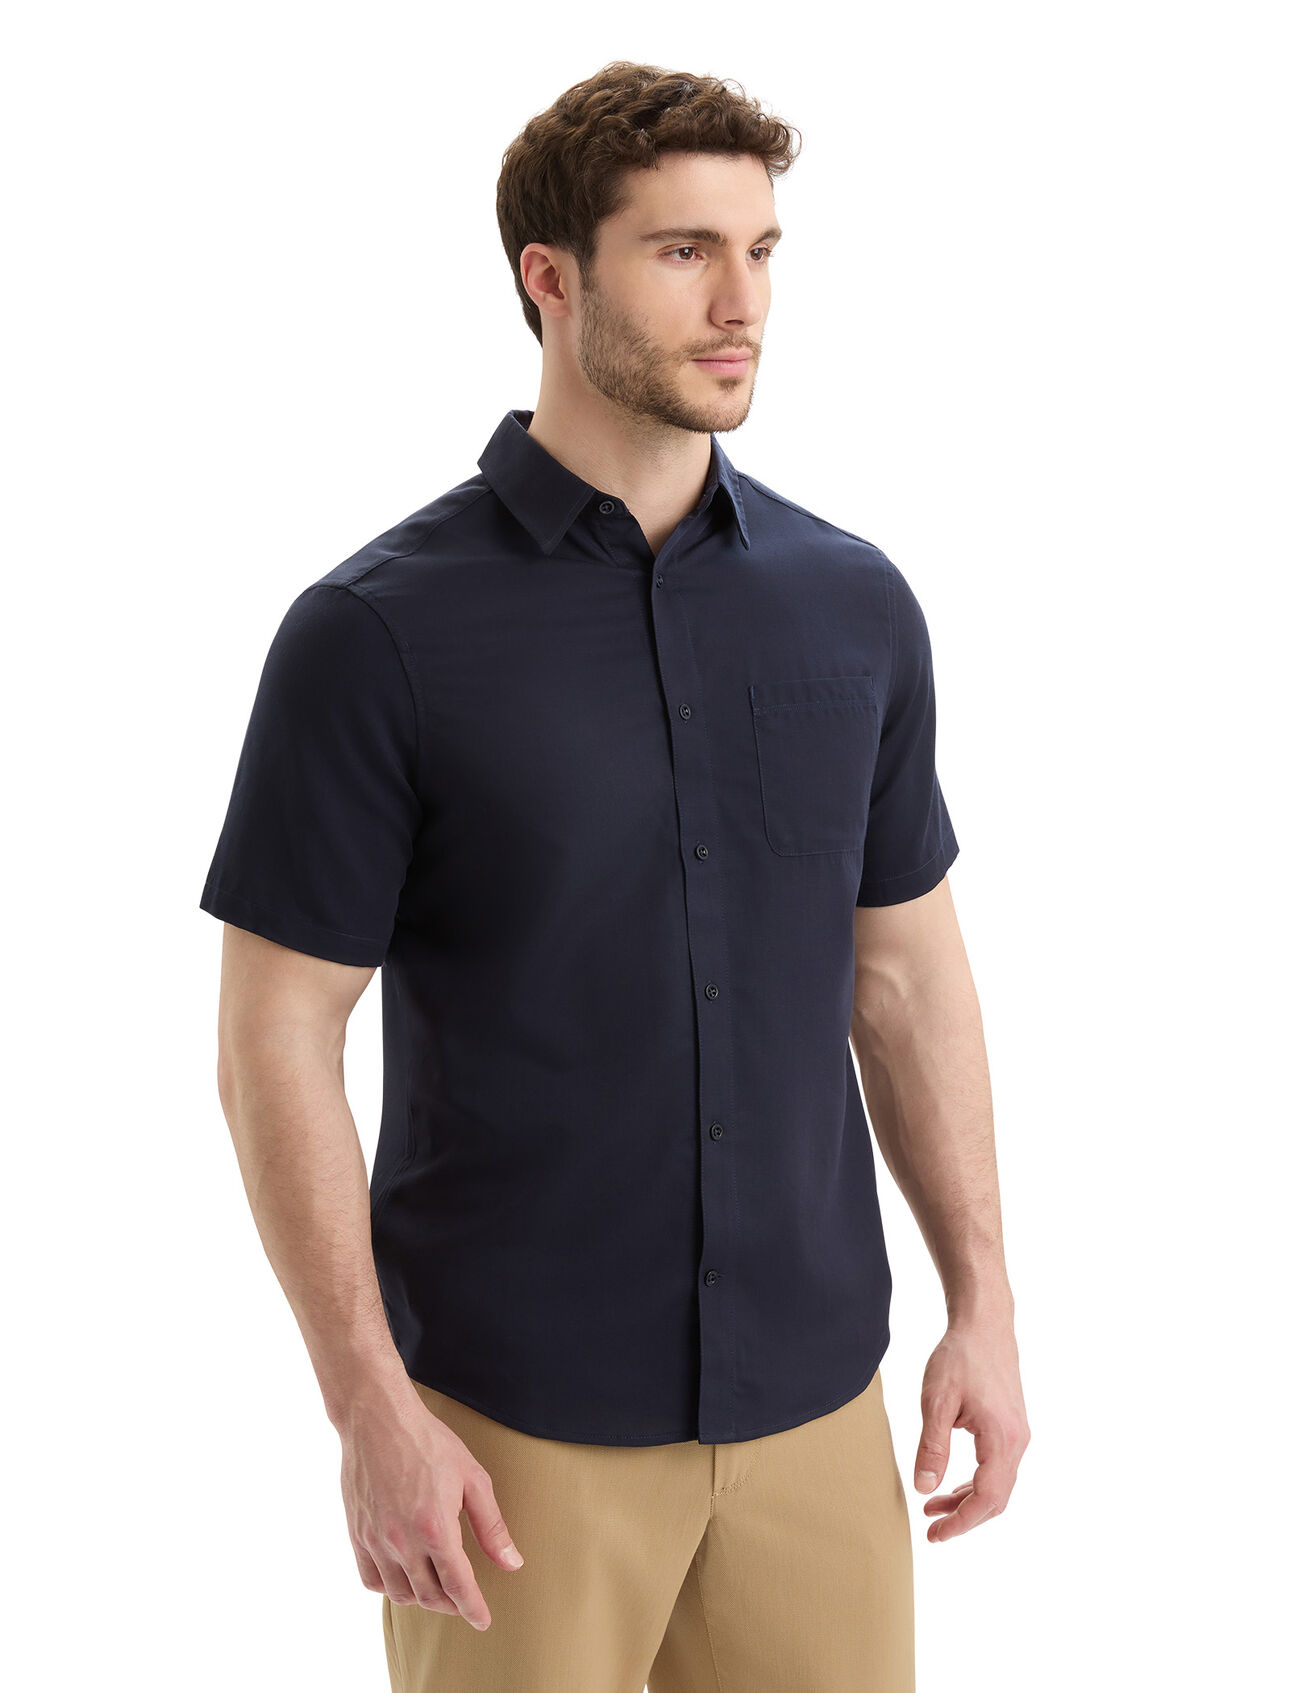 para hombre Merino Steveston Short Sleeve Shirt A classic lightweight woven shirt featuring our breathable Cool-Lite™ woven merino blend, the Steveston Short Sleeve Shirt combines versatile style with natural comfort.